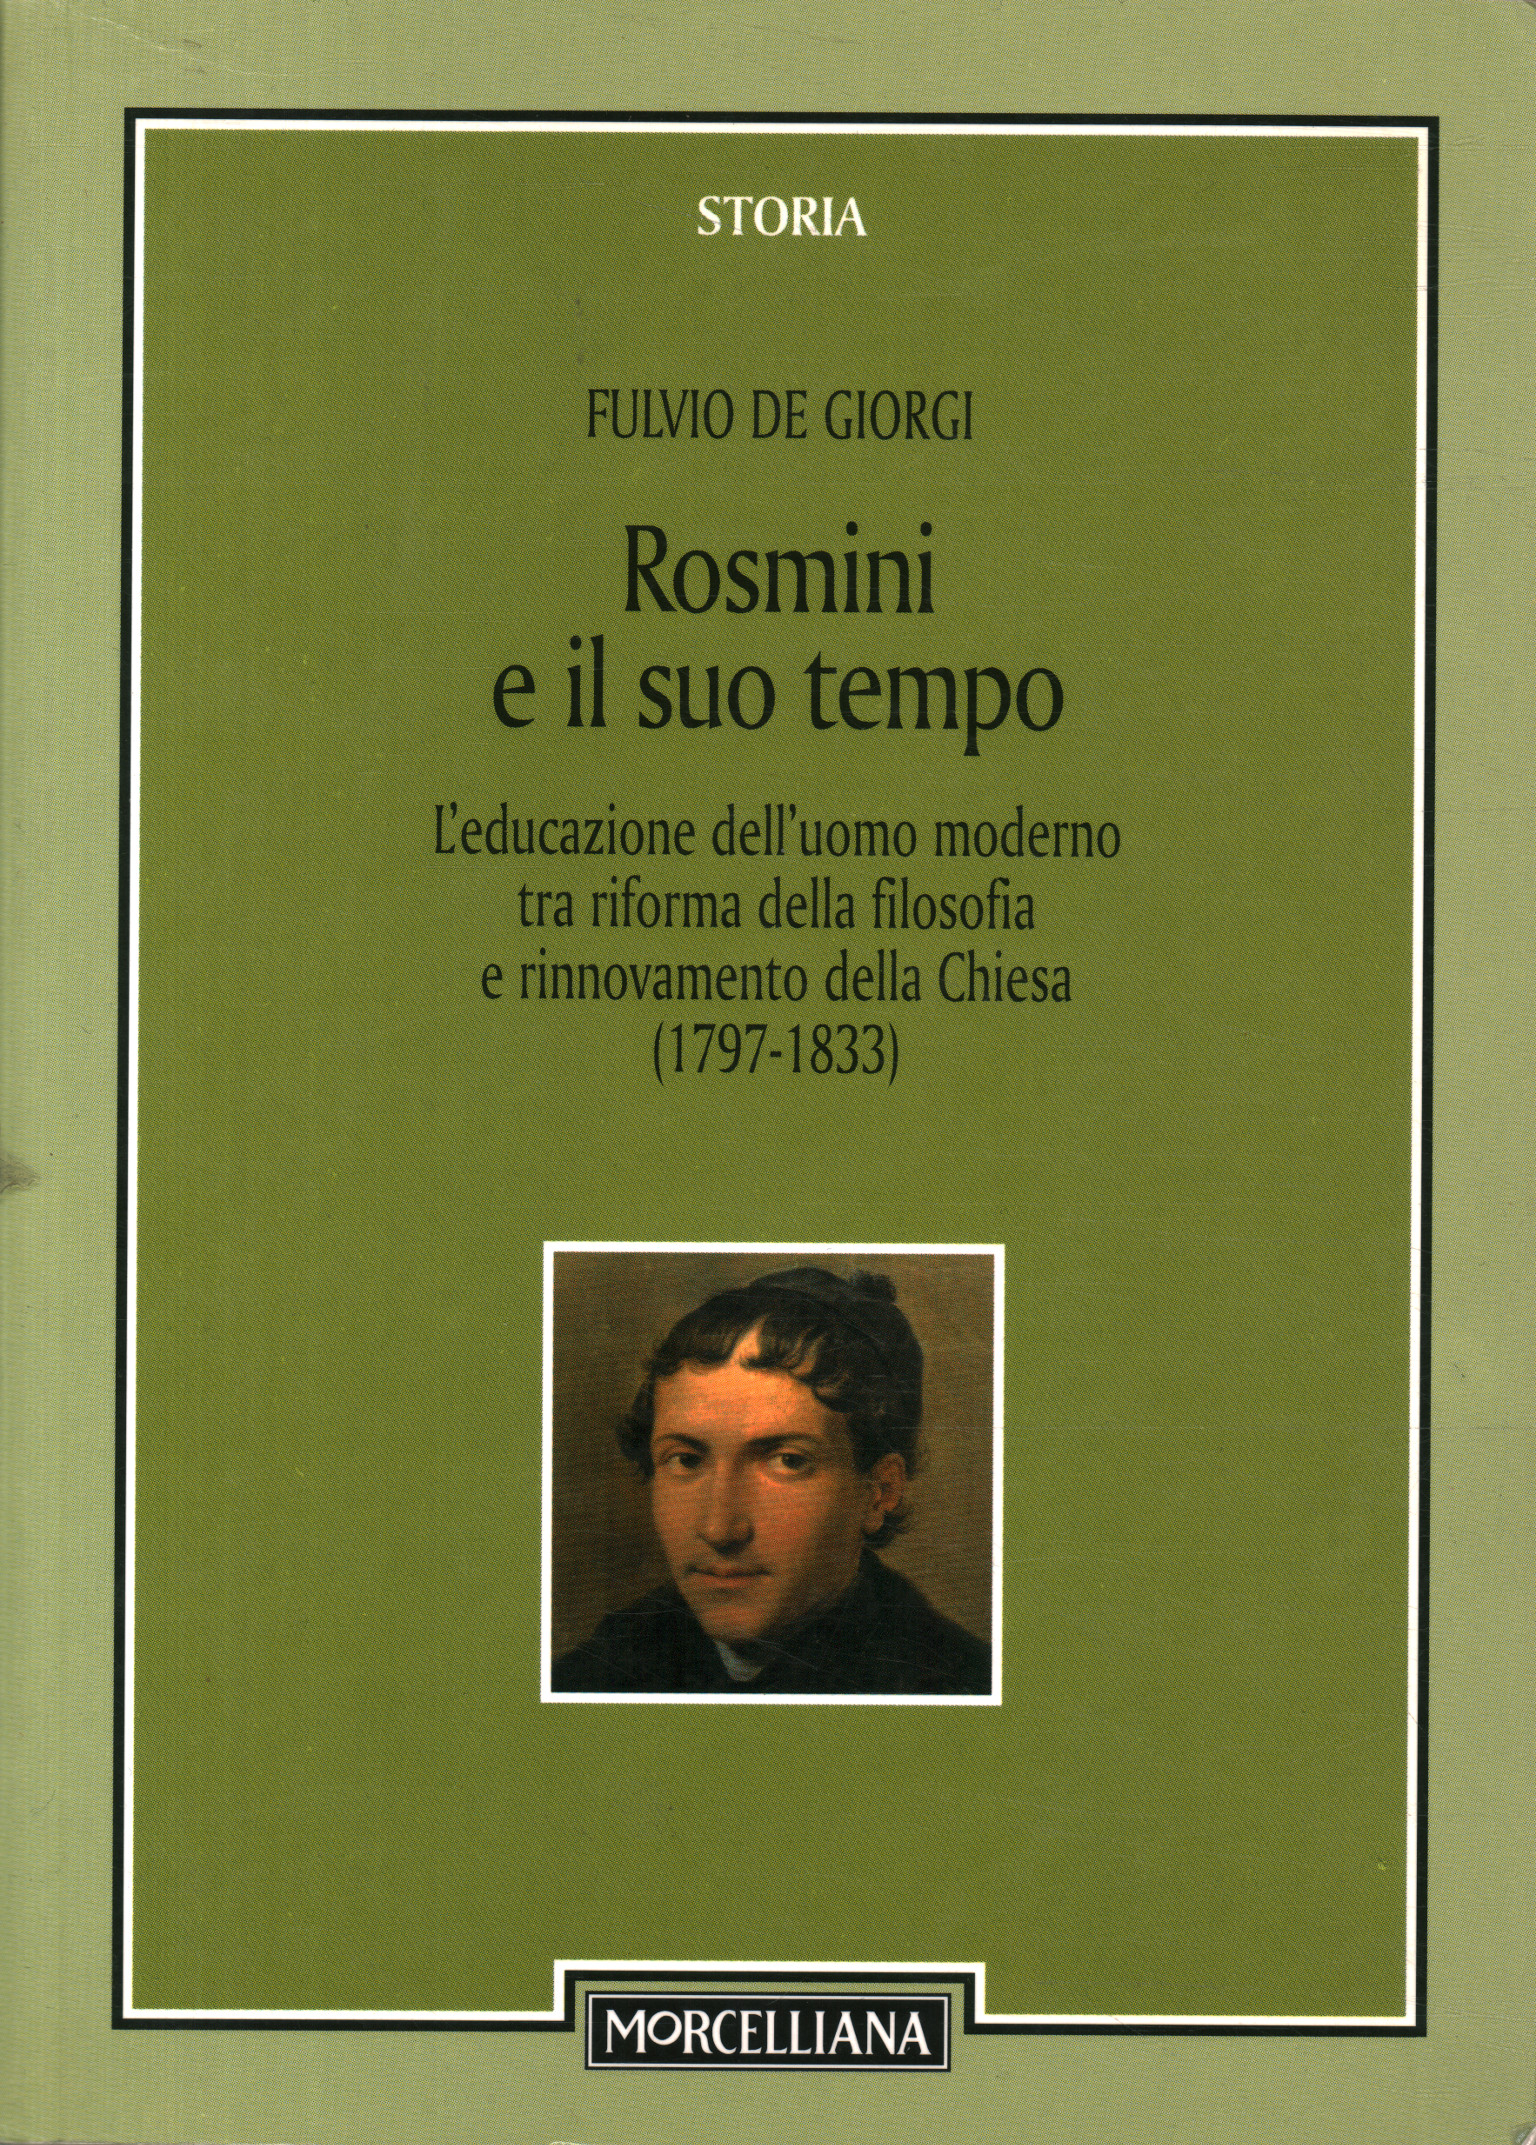 Rosmini and his time